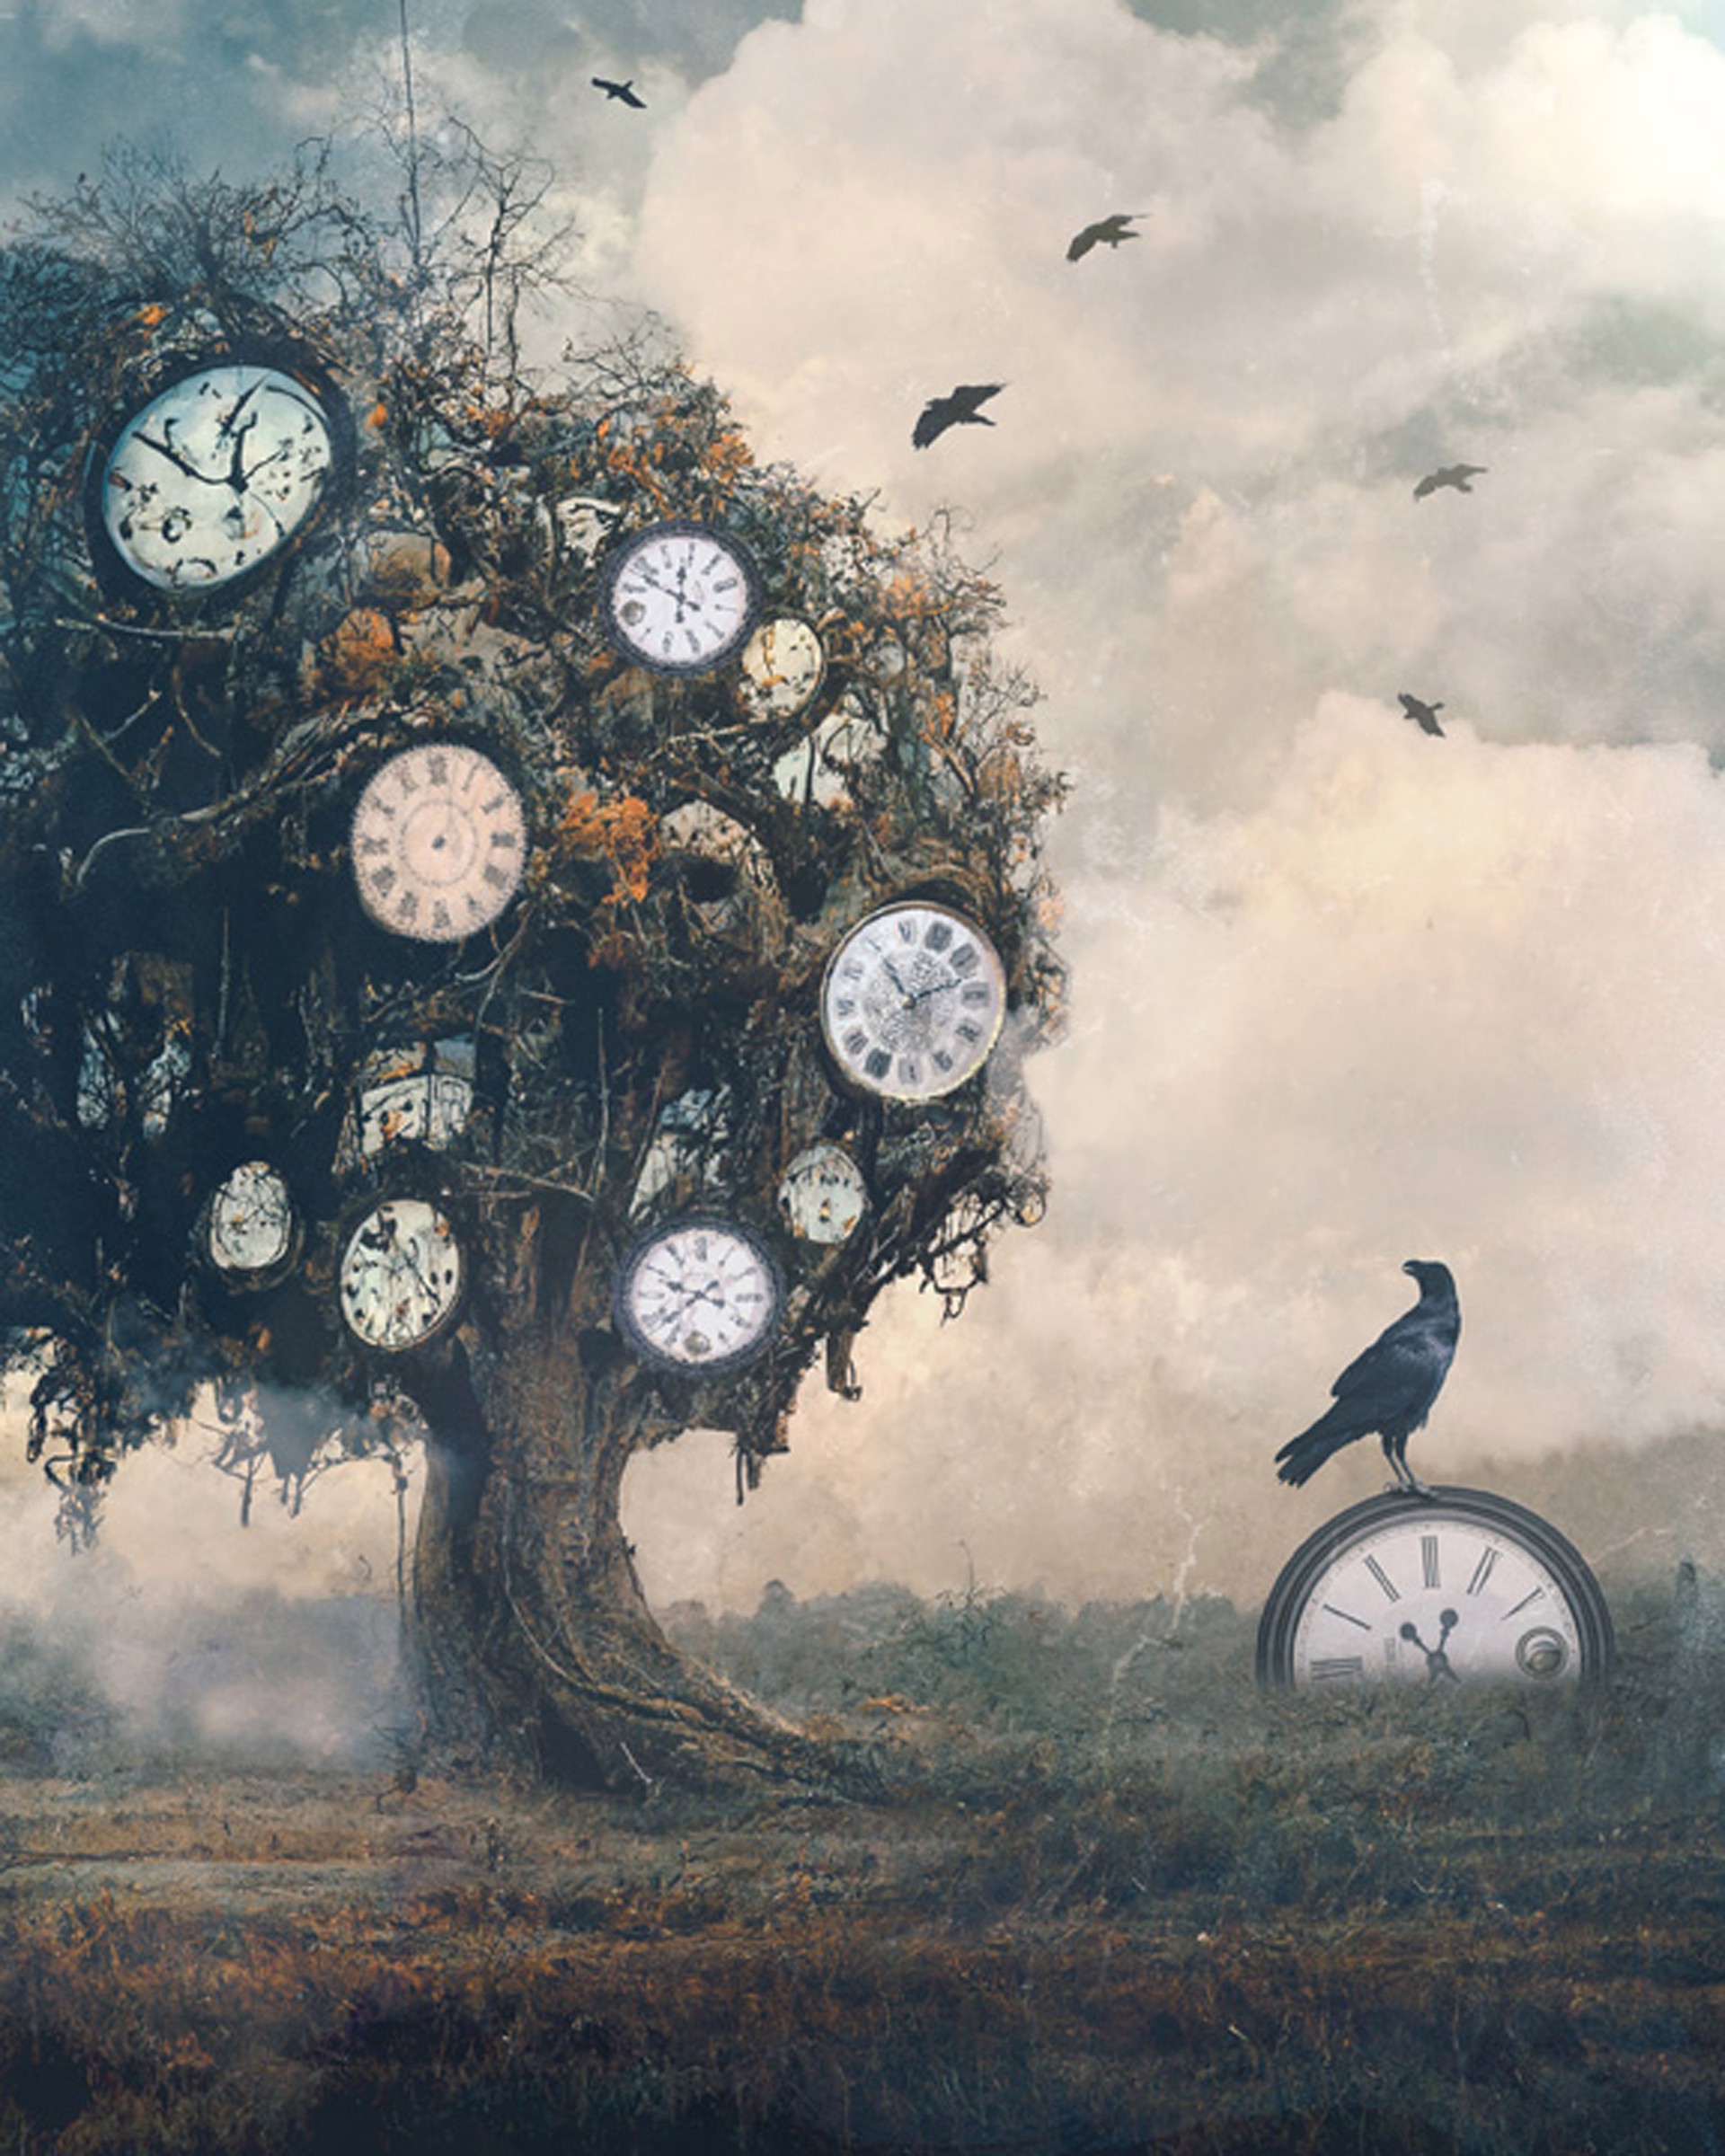 The Tree of Time by Patricia Jollimore